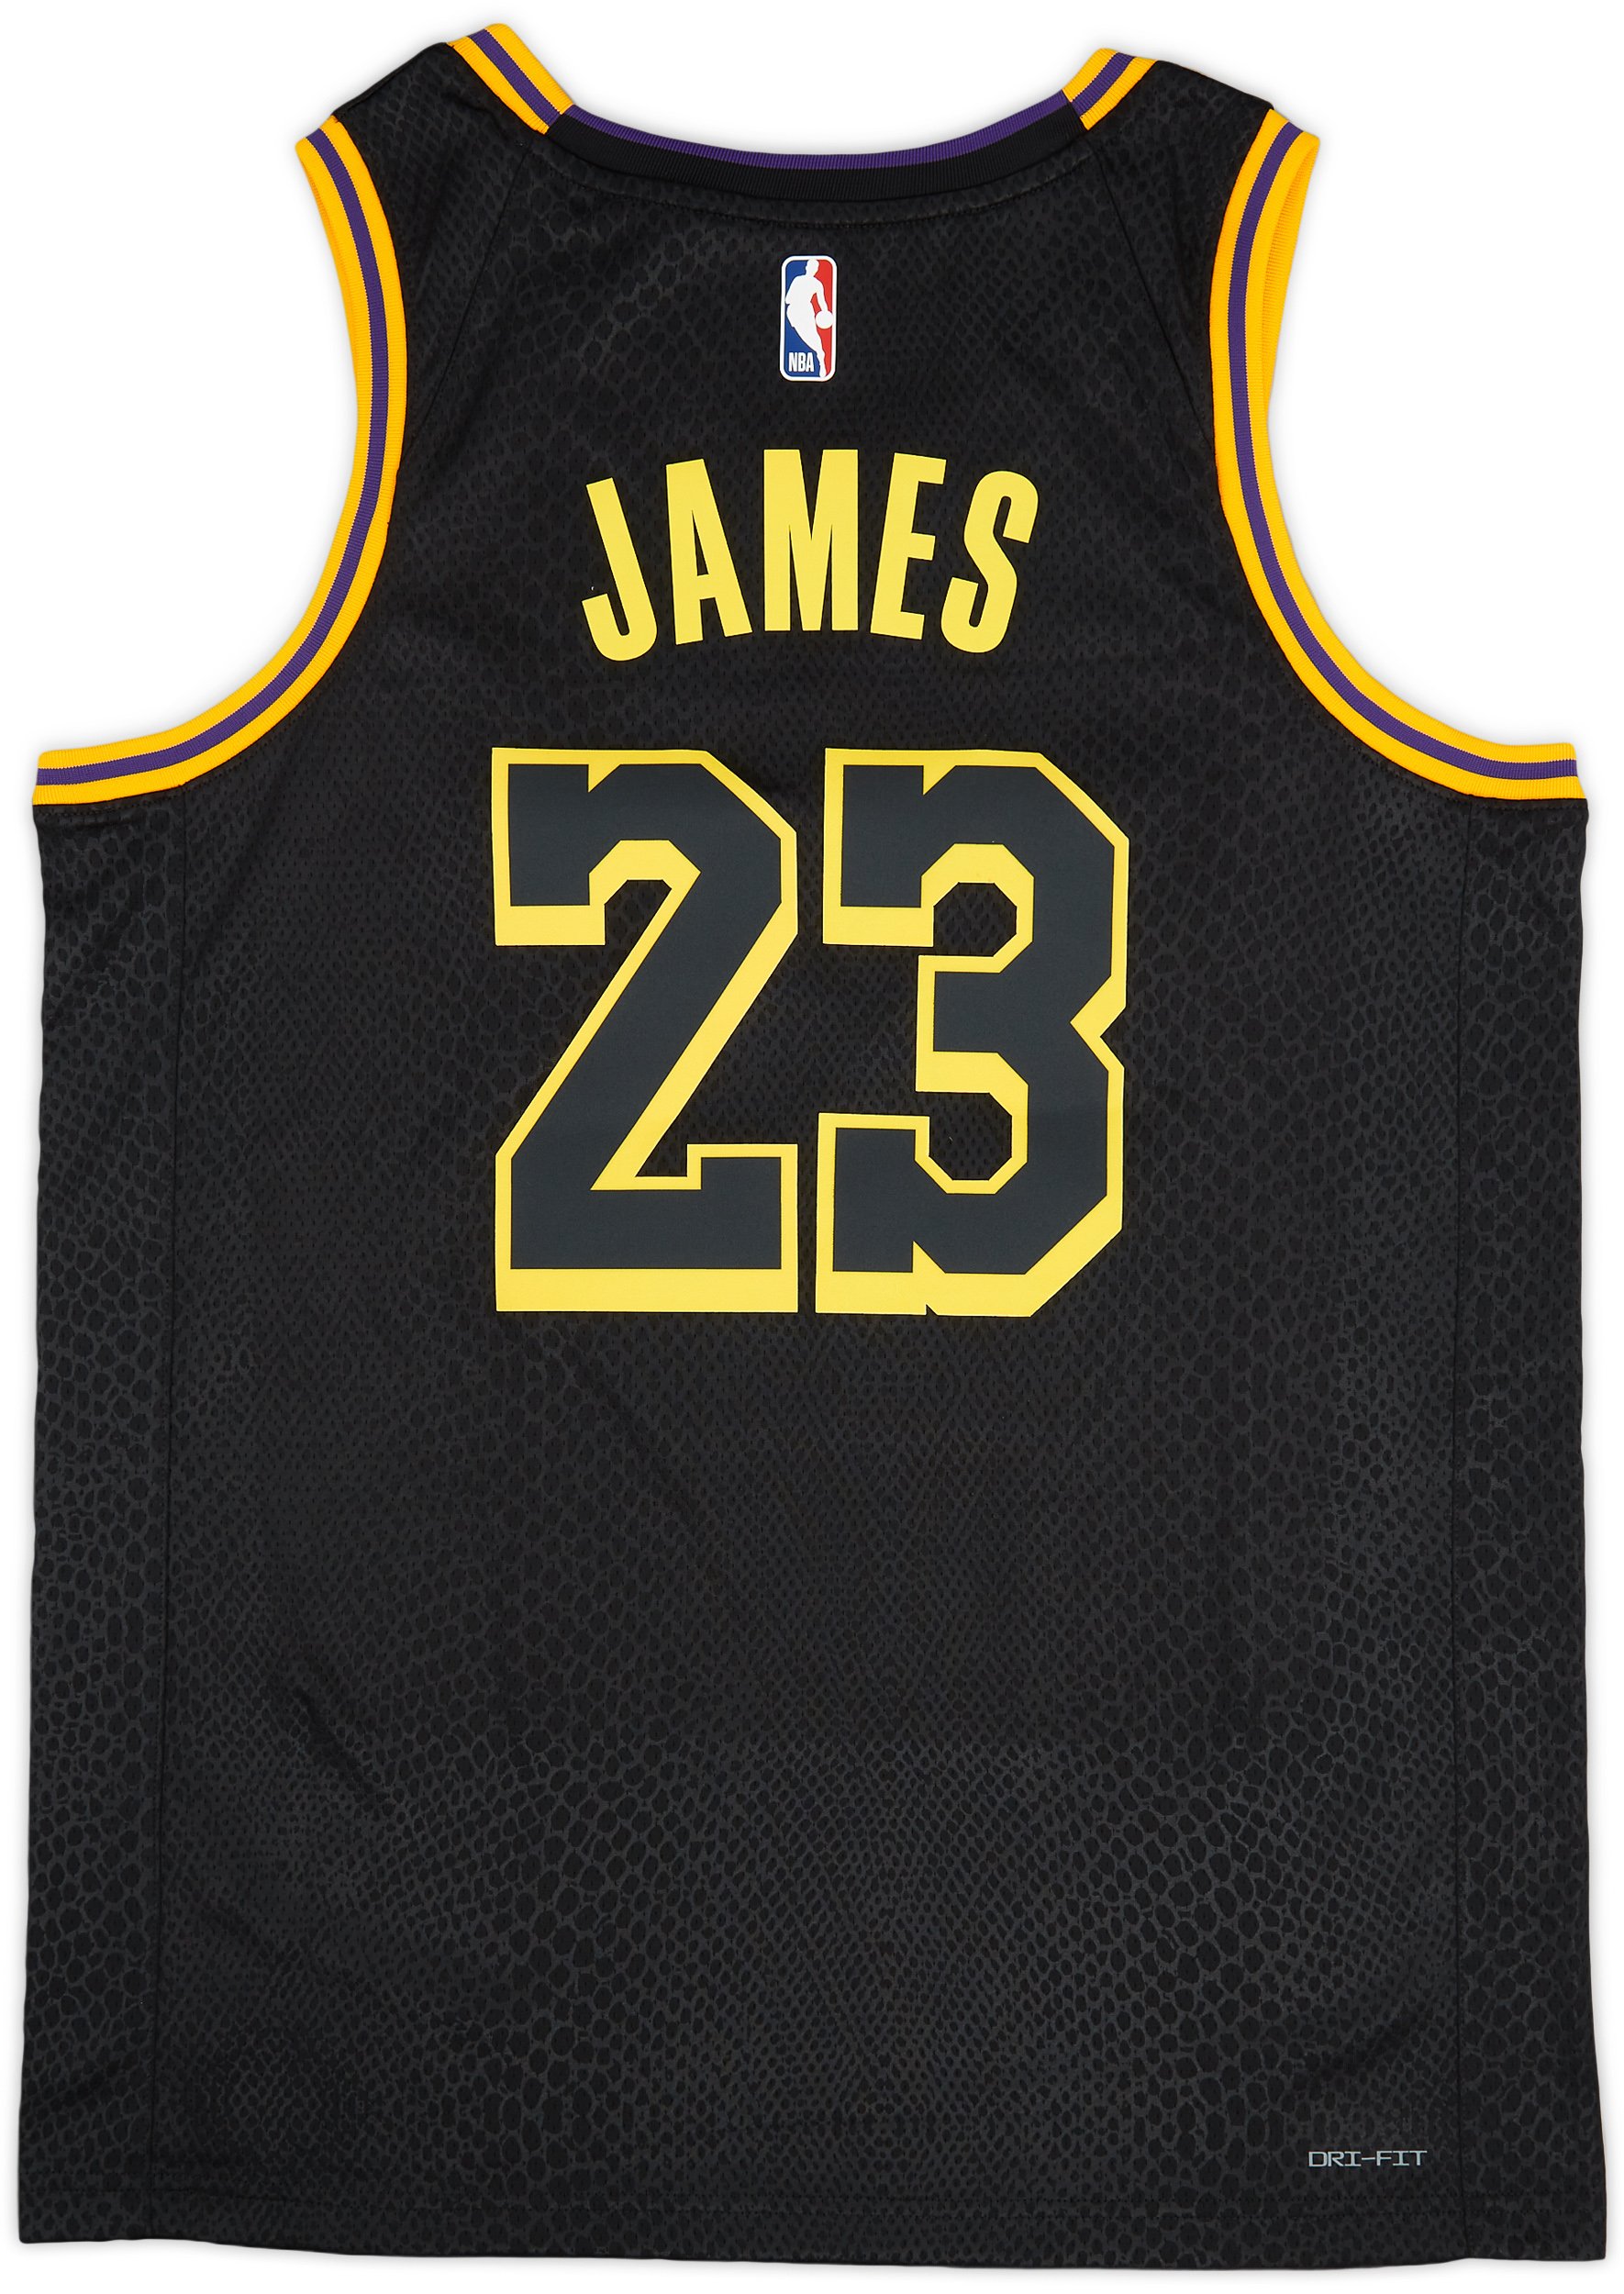 Brand New 2020-2021 Alternate Colorway Lakers Jersey. Lebron James #23  Size: S